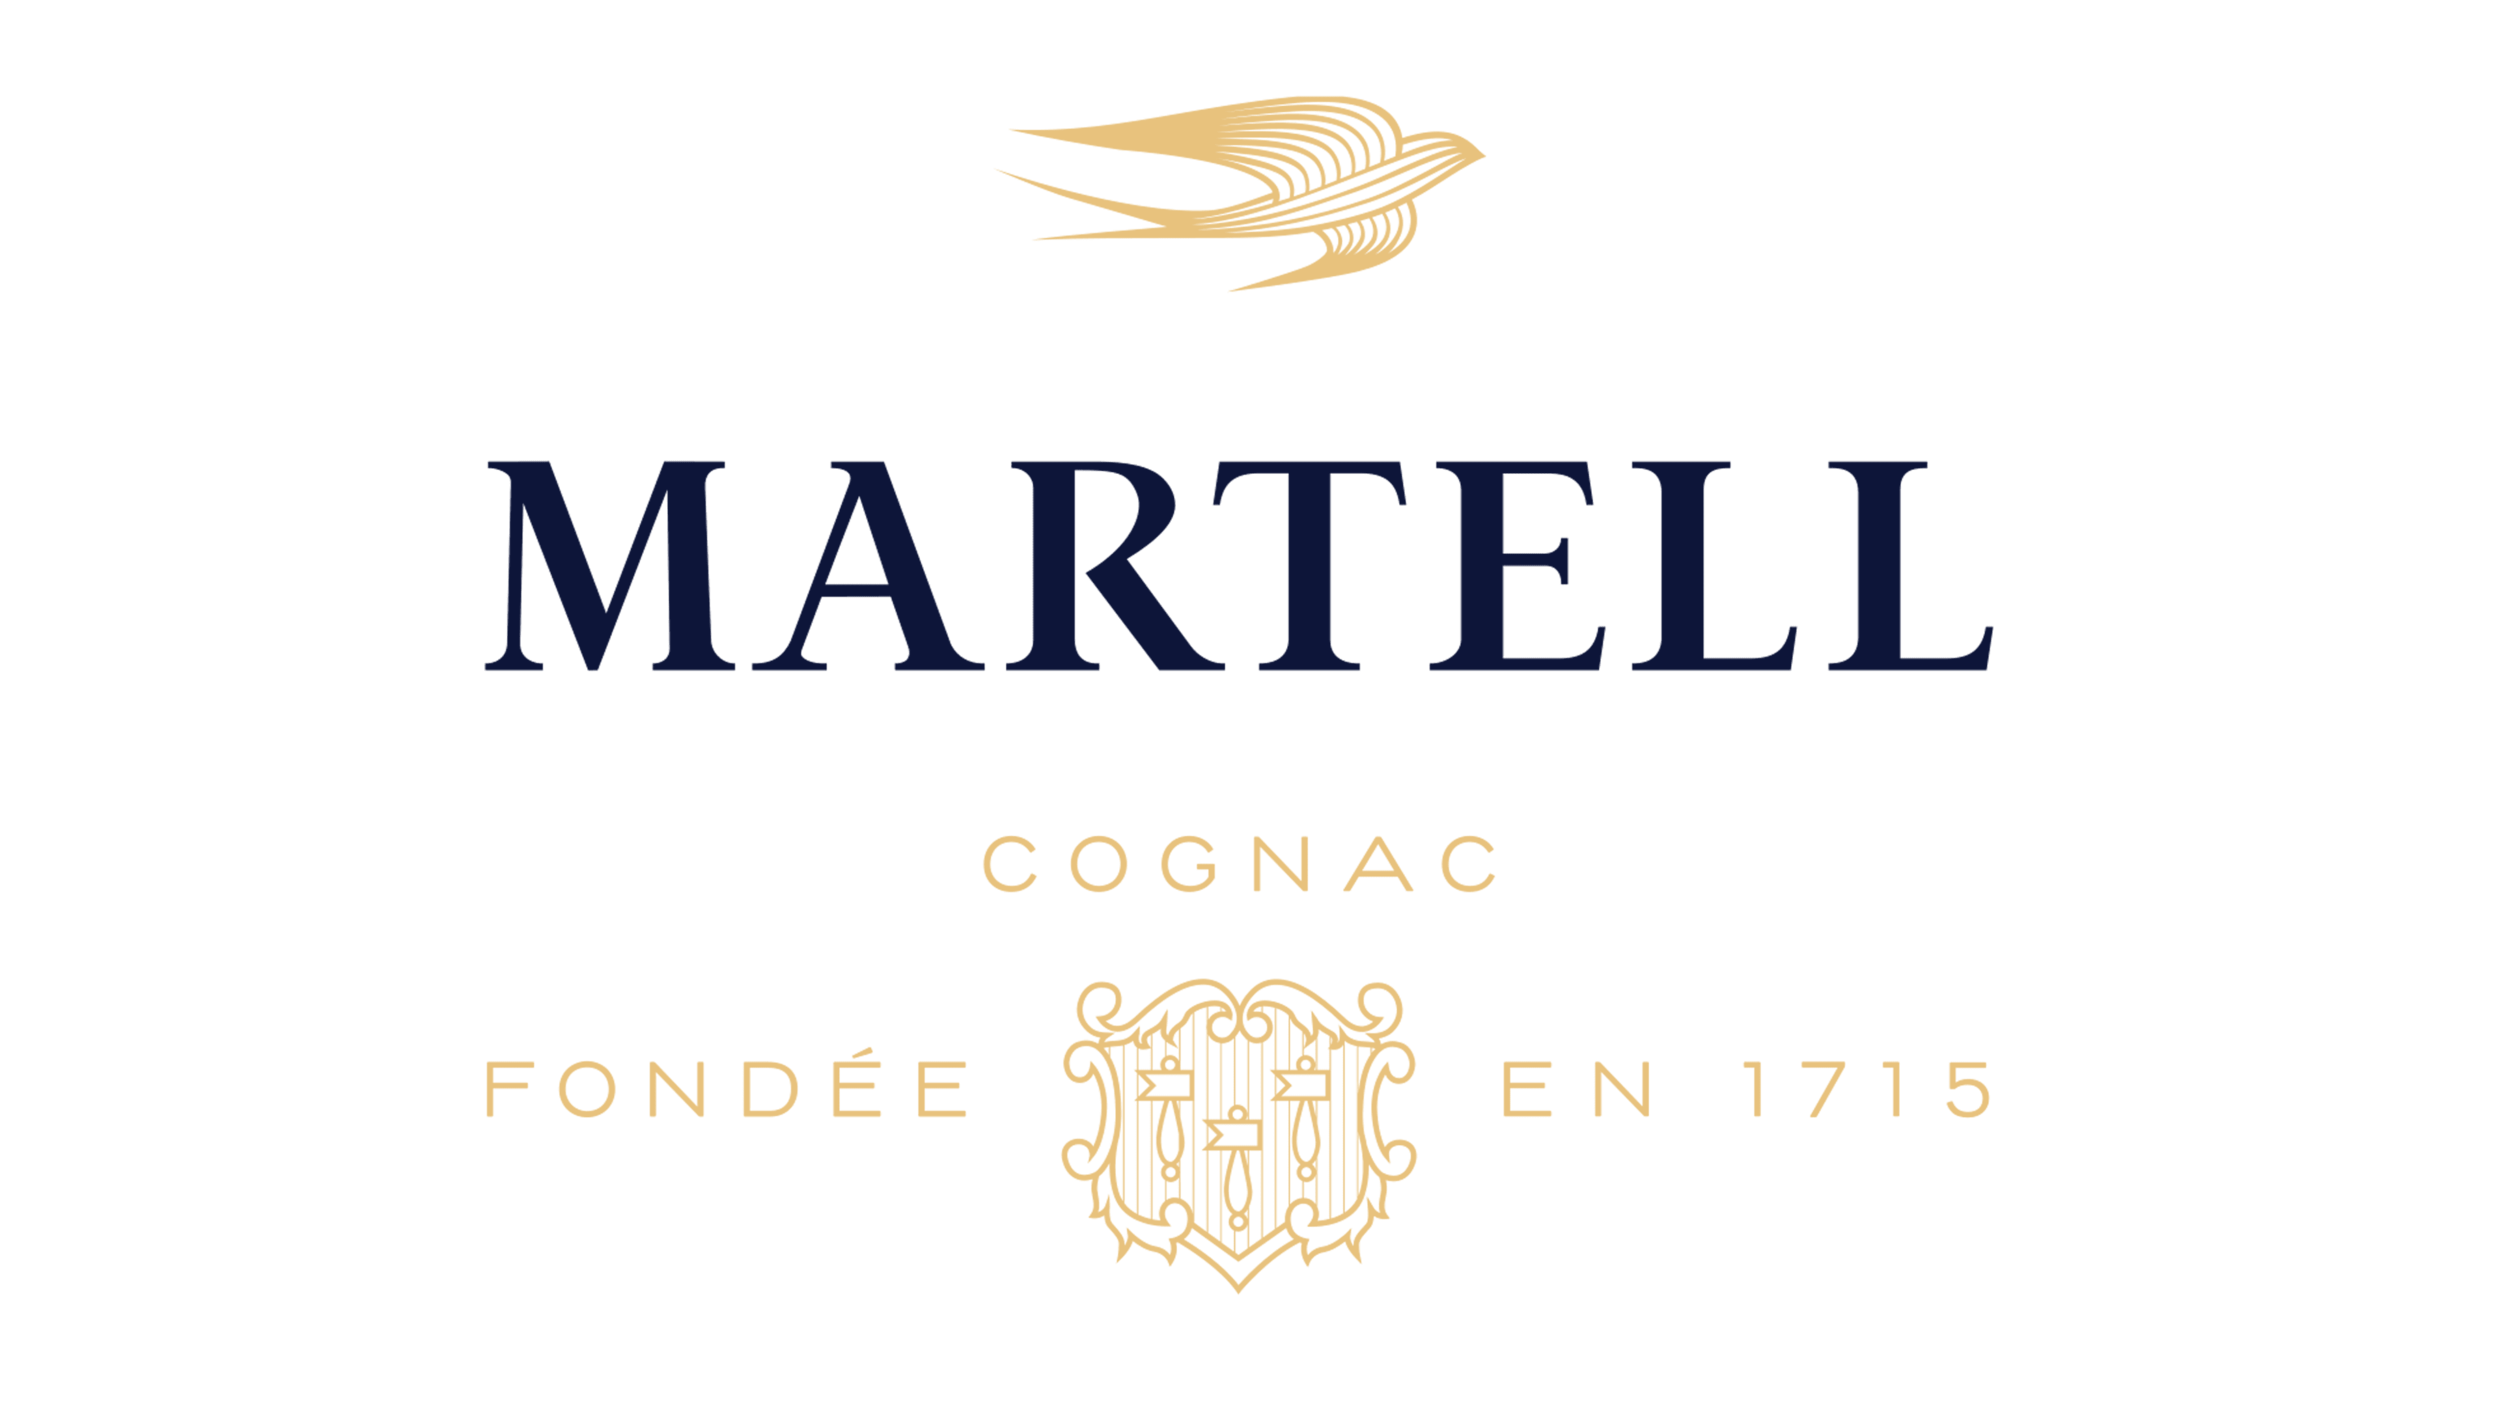 Martell-logo.png